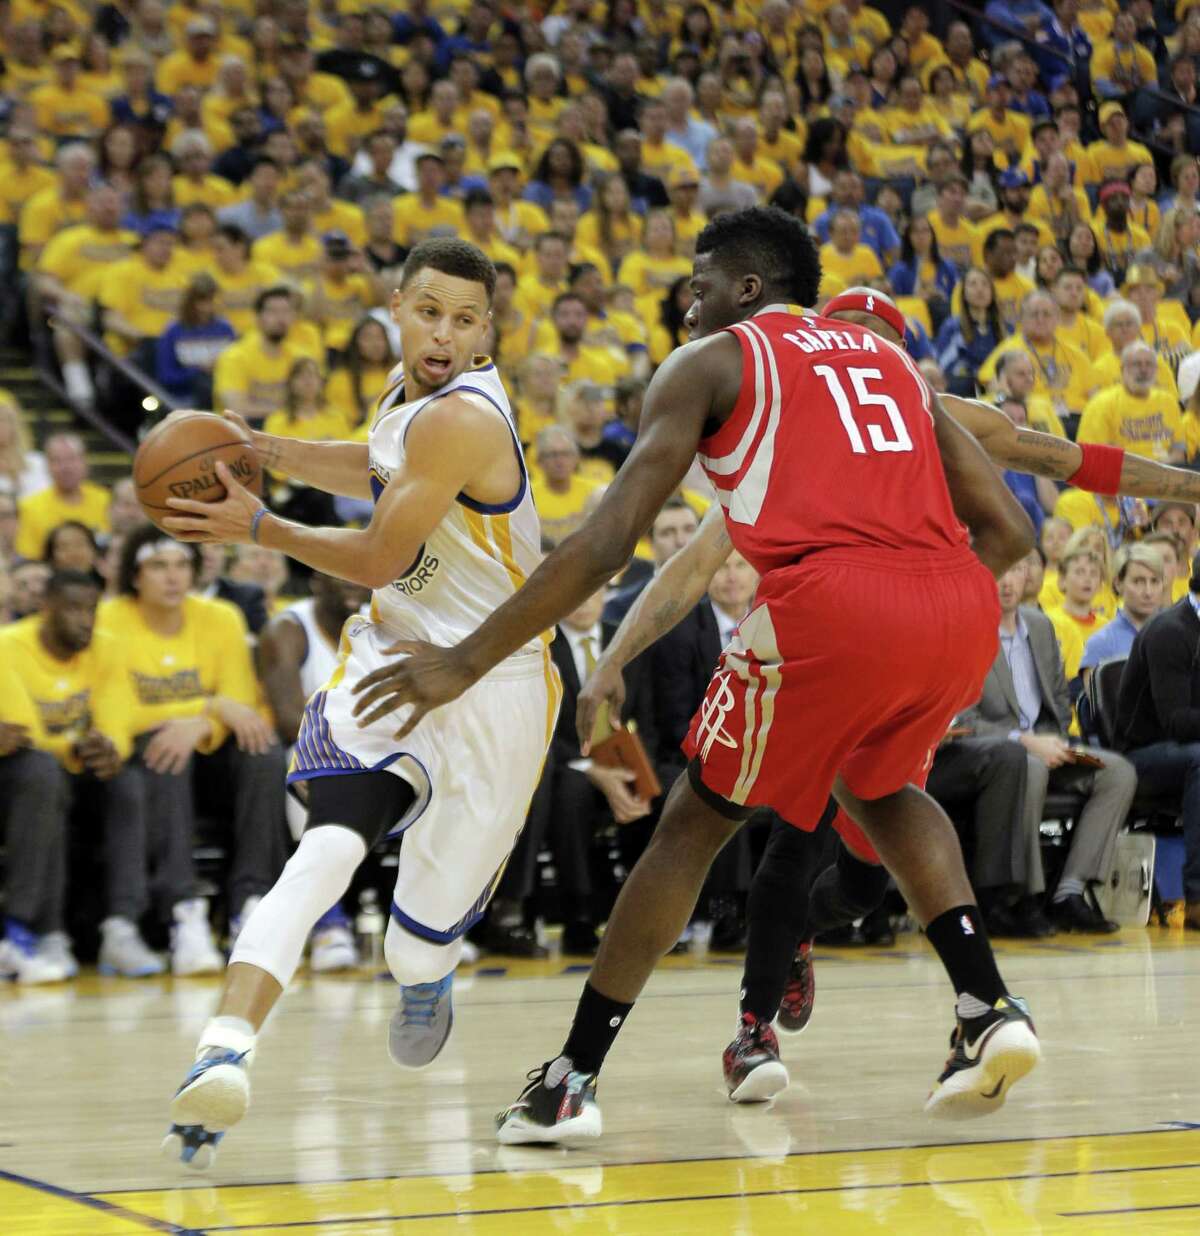 First round Game 1 April 16: Warriors 104, Rockets 78 The Warriors did not have Curry for most of the second half due to an ankle injury, but the club still rolled over the Rockets. Record: 1-0 Warriors lead series